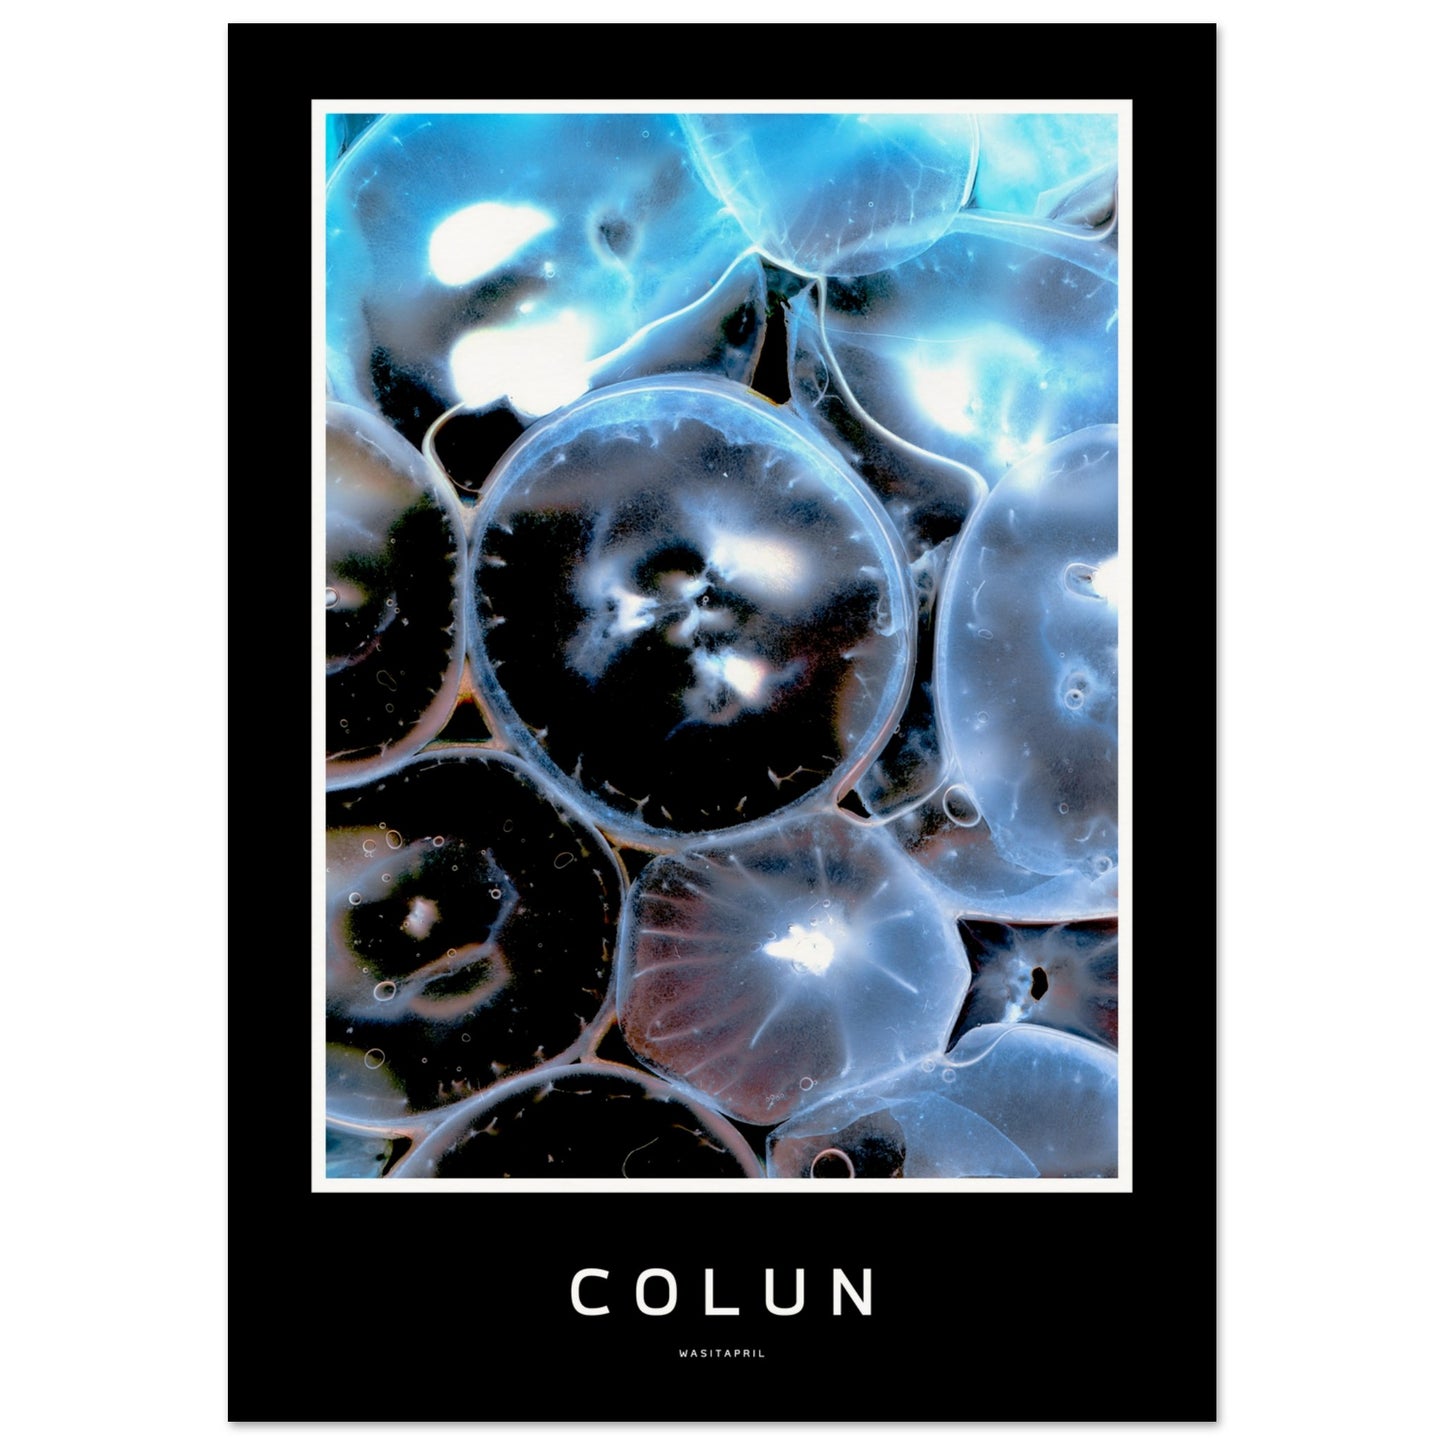 [COLUN - black edition] | Museum-Quality Poster